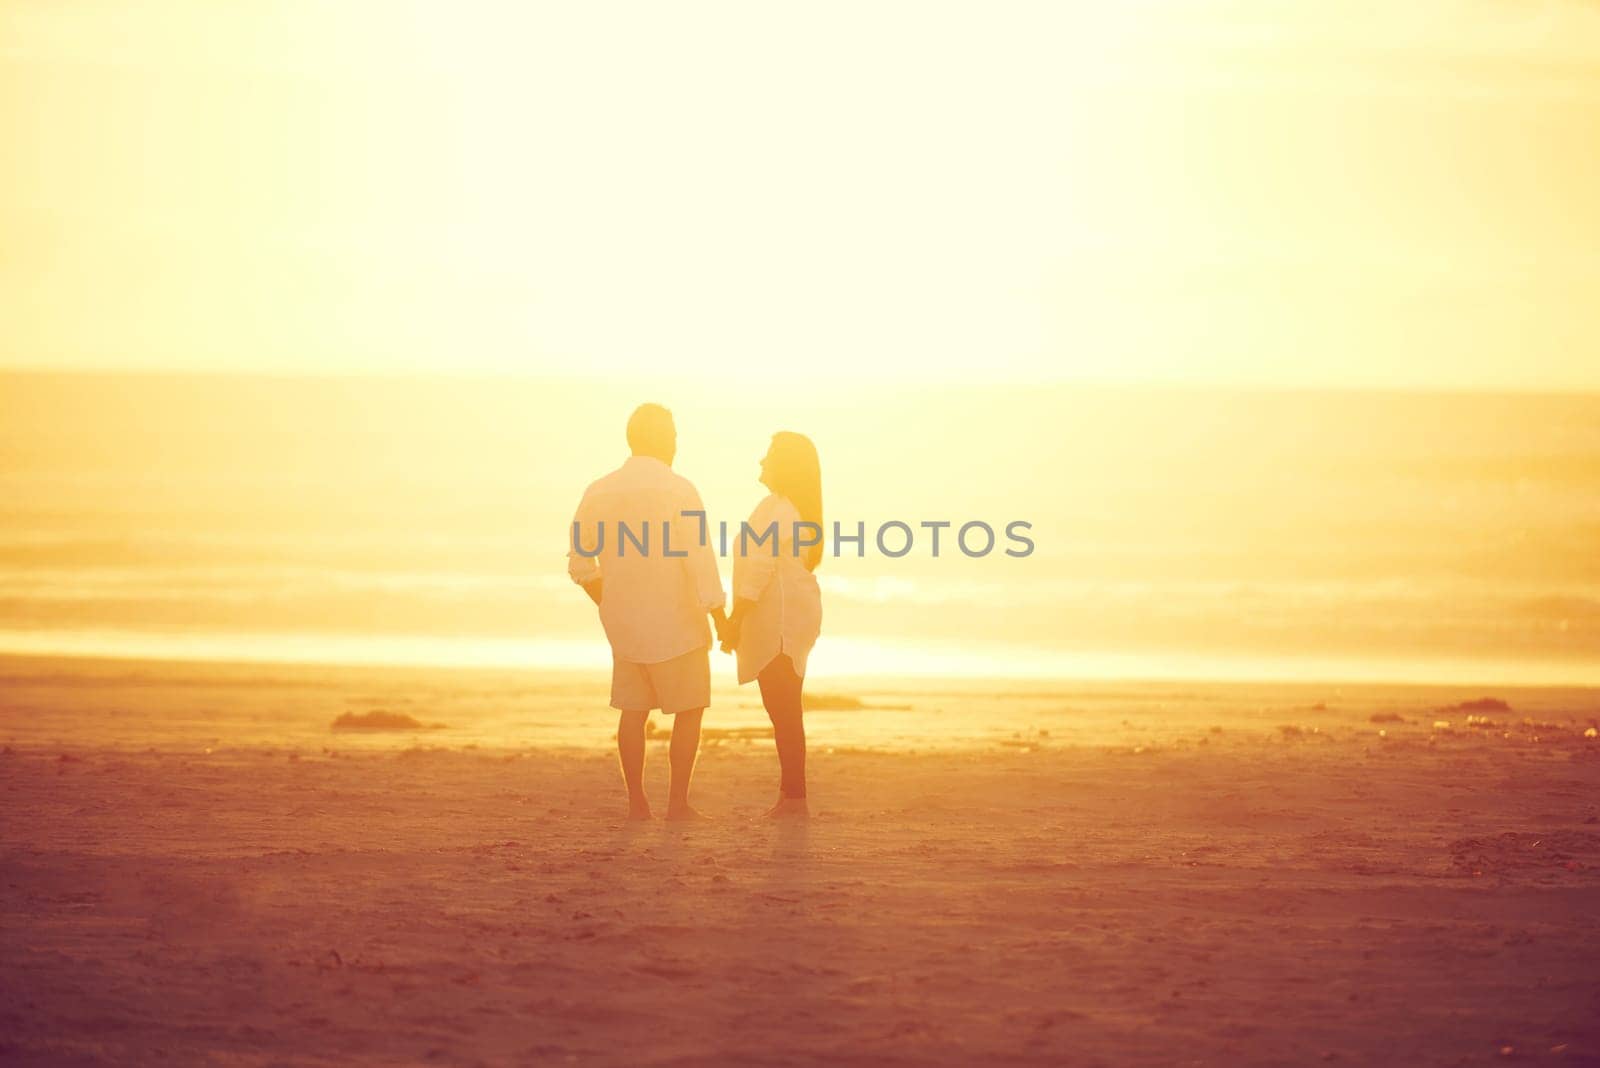 Keeping the romance alive. Rearview shot of an affectionate mature couple walking hand in hand on the beach